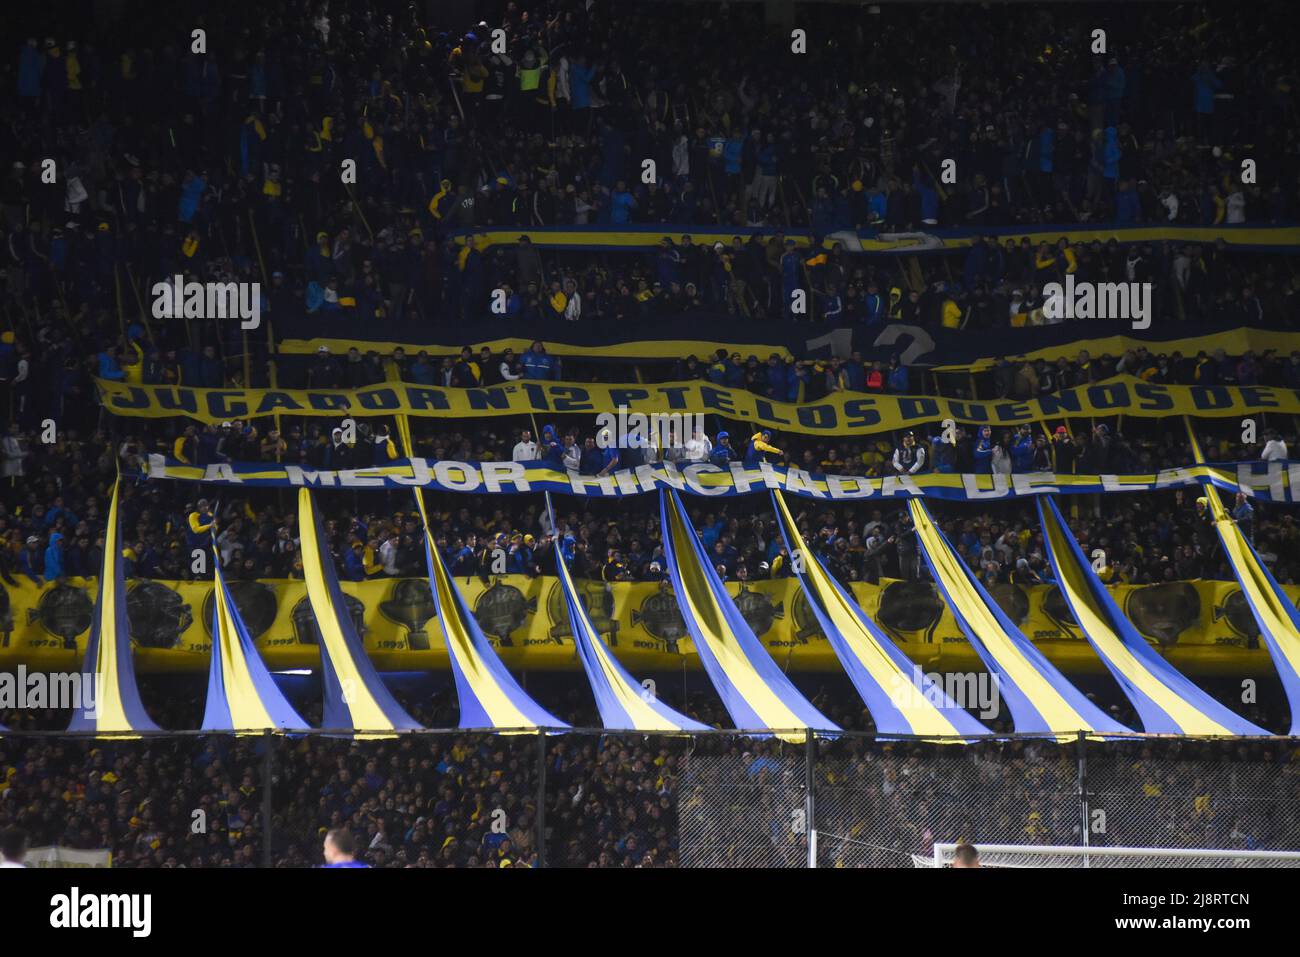 Buenos Aires, Argentina. 17th May, 2022. Boca Juniors (from Argentina) and Corinthians during the game held at Estadio La Bombonera in Buenos Aires, Argentina on May 17, 2022. The match is valid for the Copa Libertadores 2022. Credit: Gabriel Sotelo/FotoArena/Alamy Live News Stock Photo